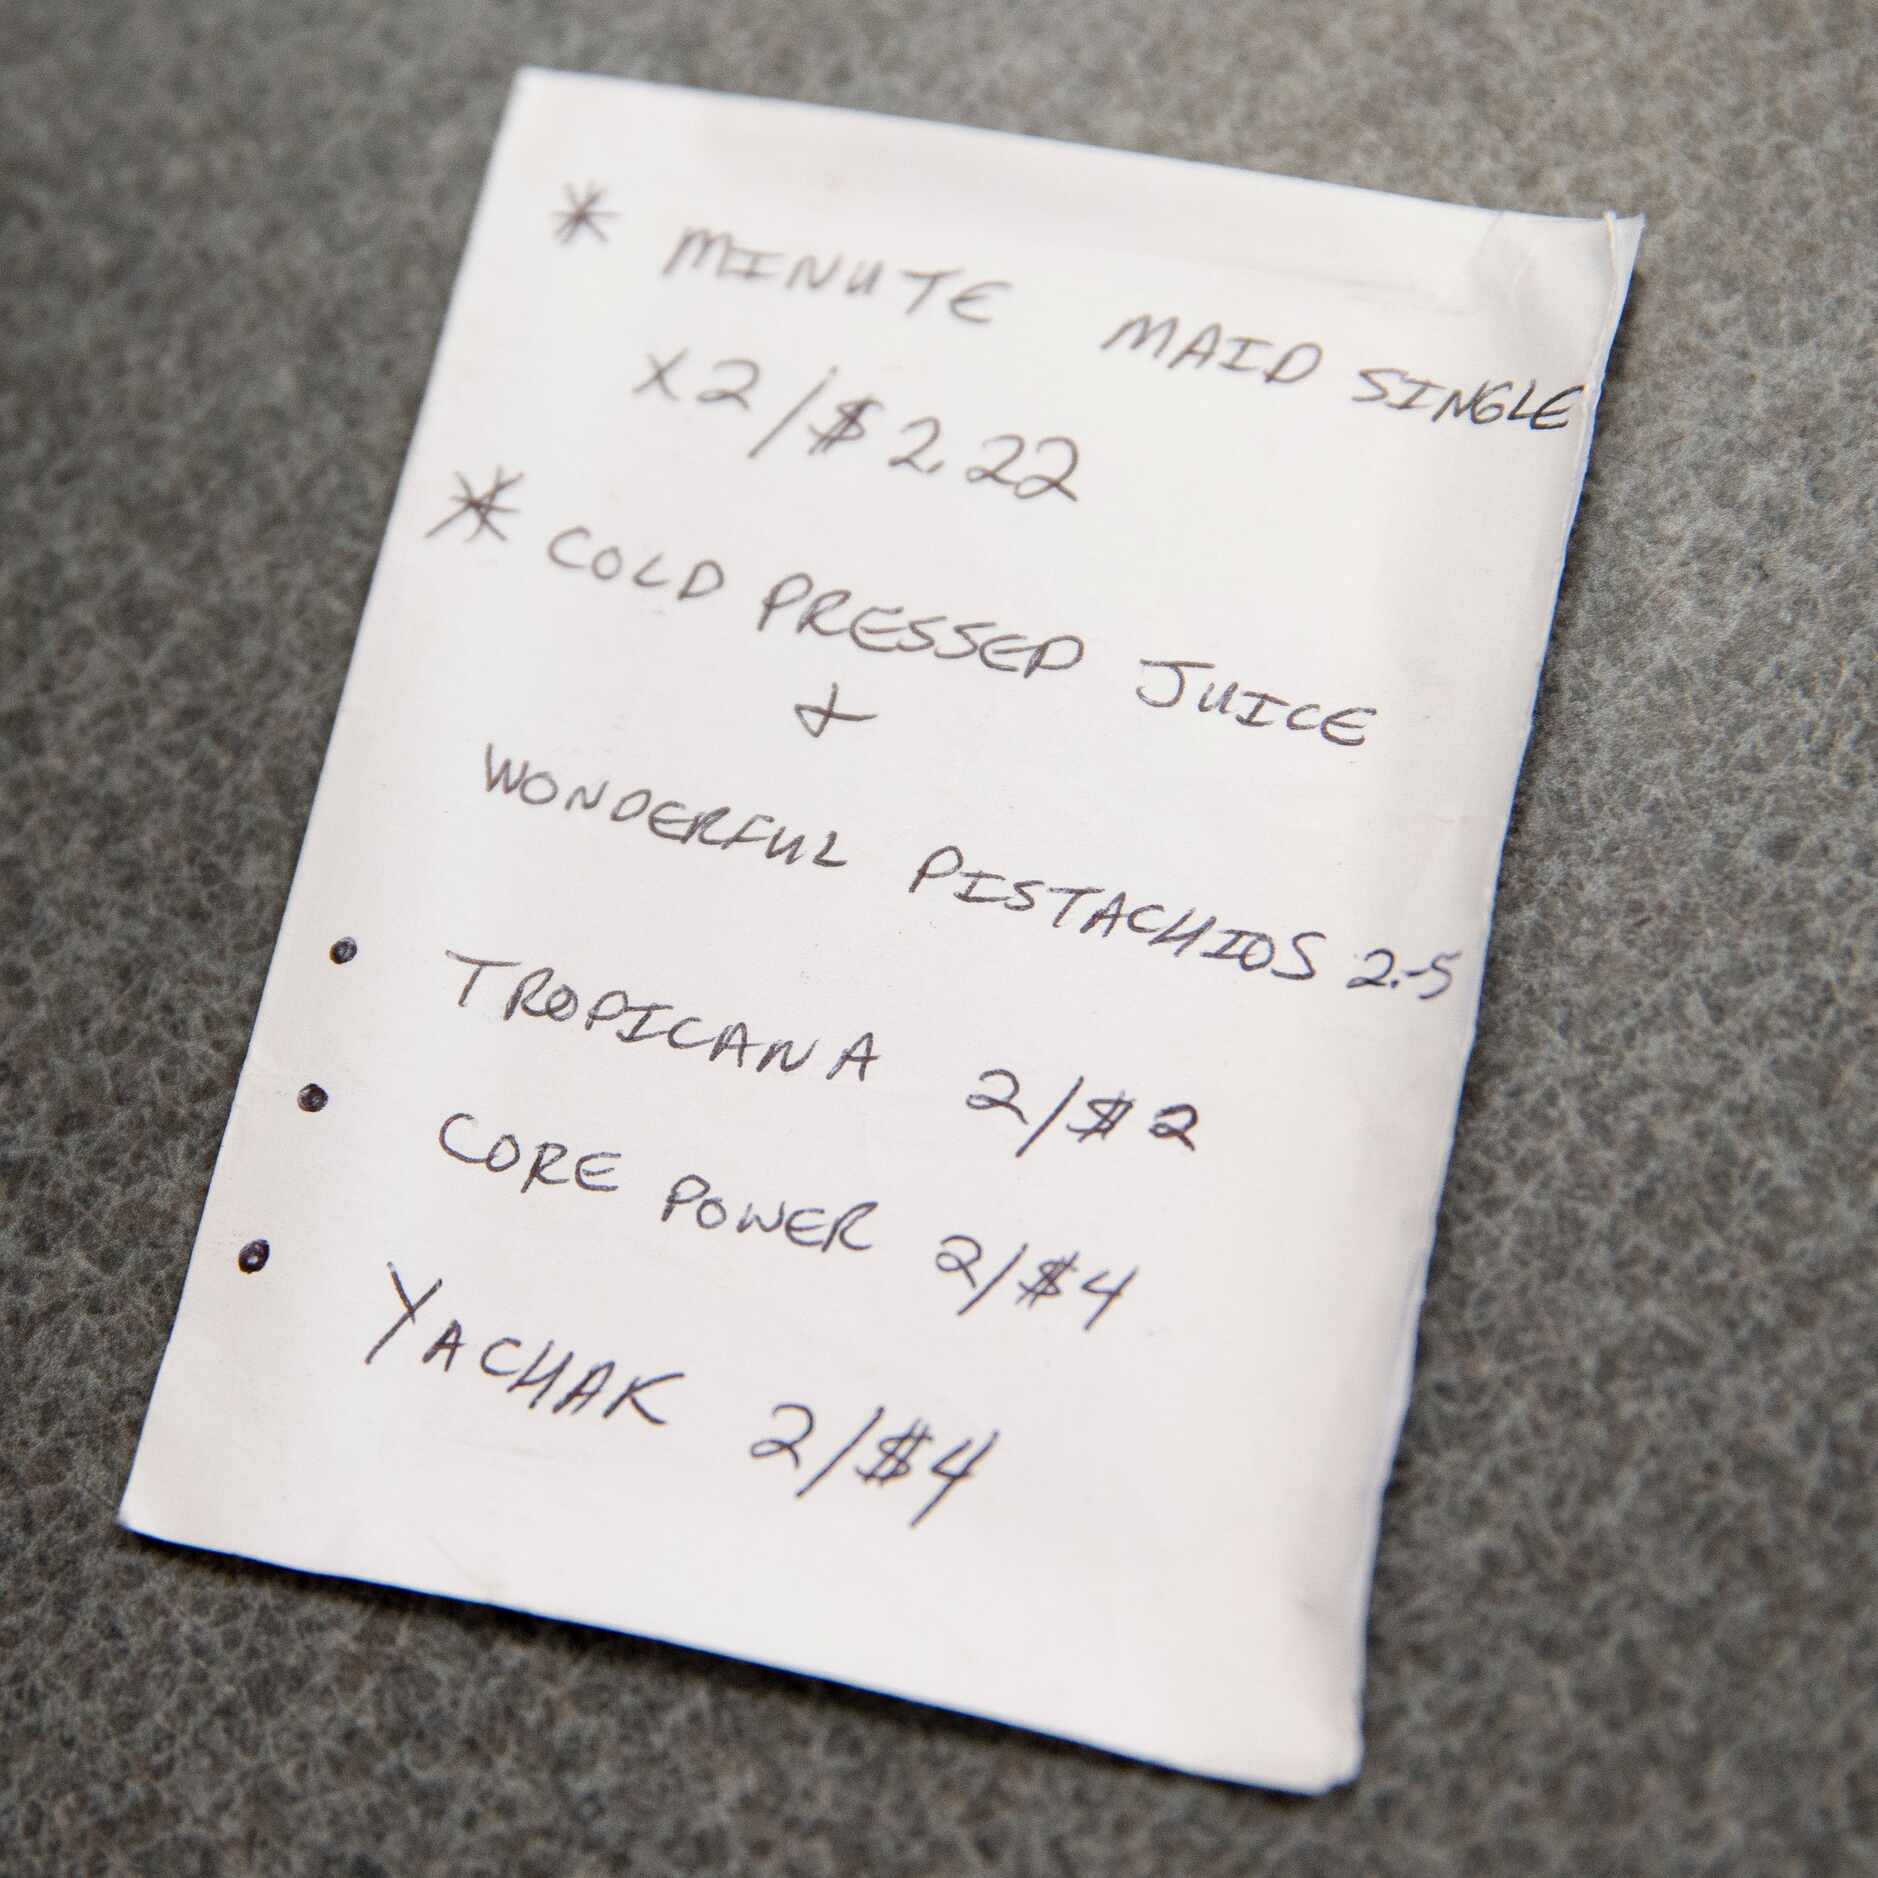 Randy budgeted and tracked the prices of items he usually purchased at a convenience store...